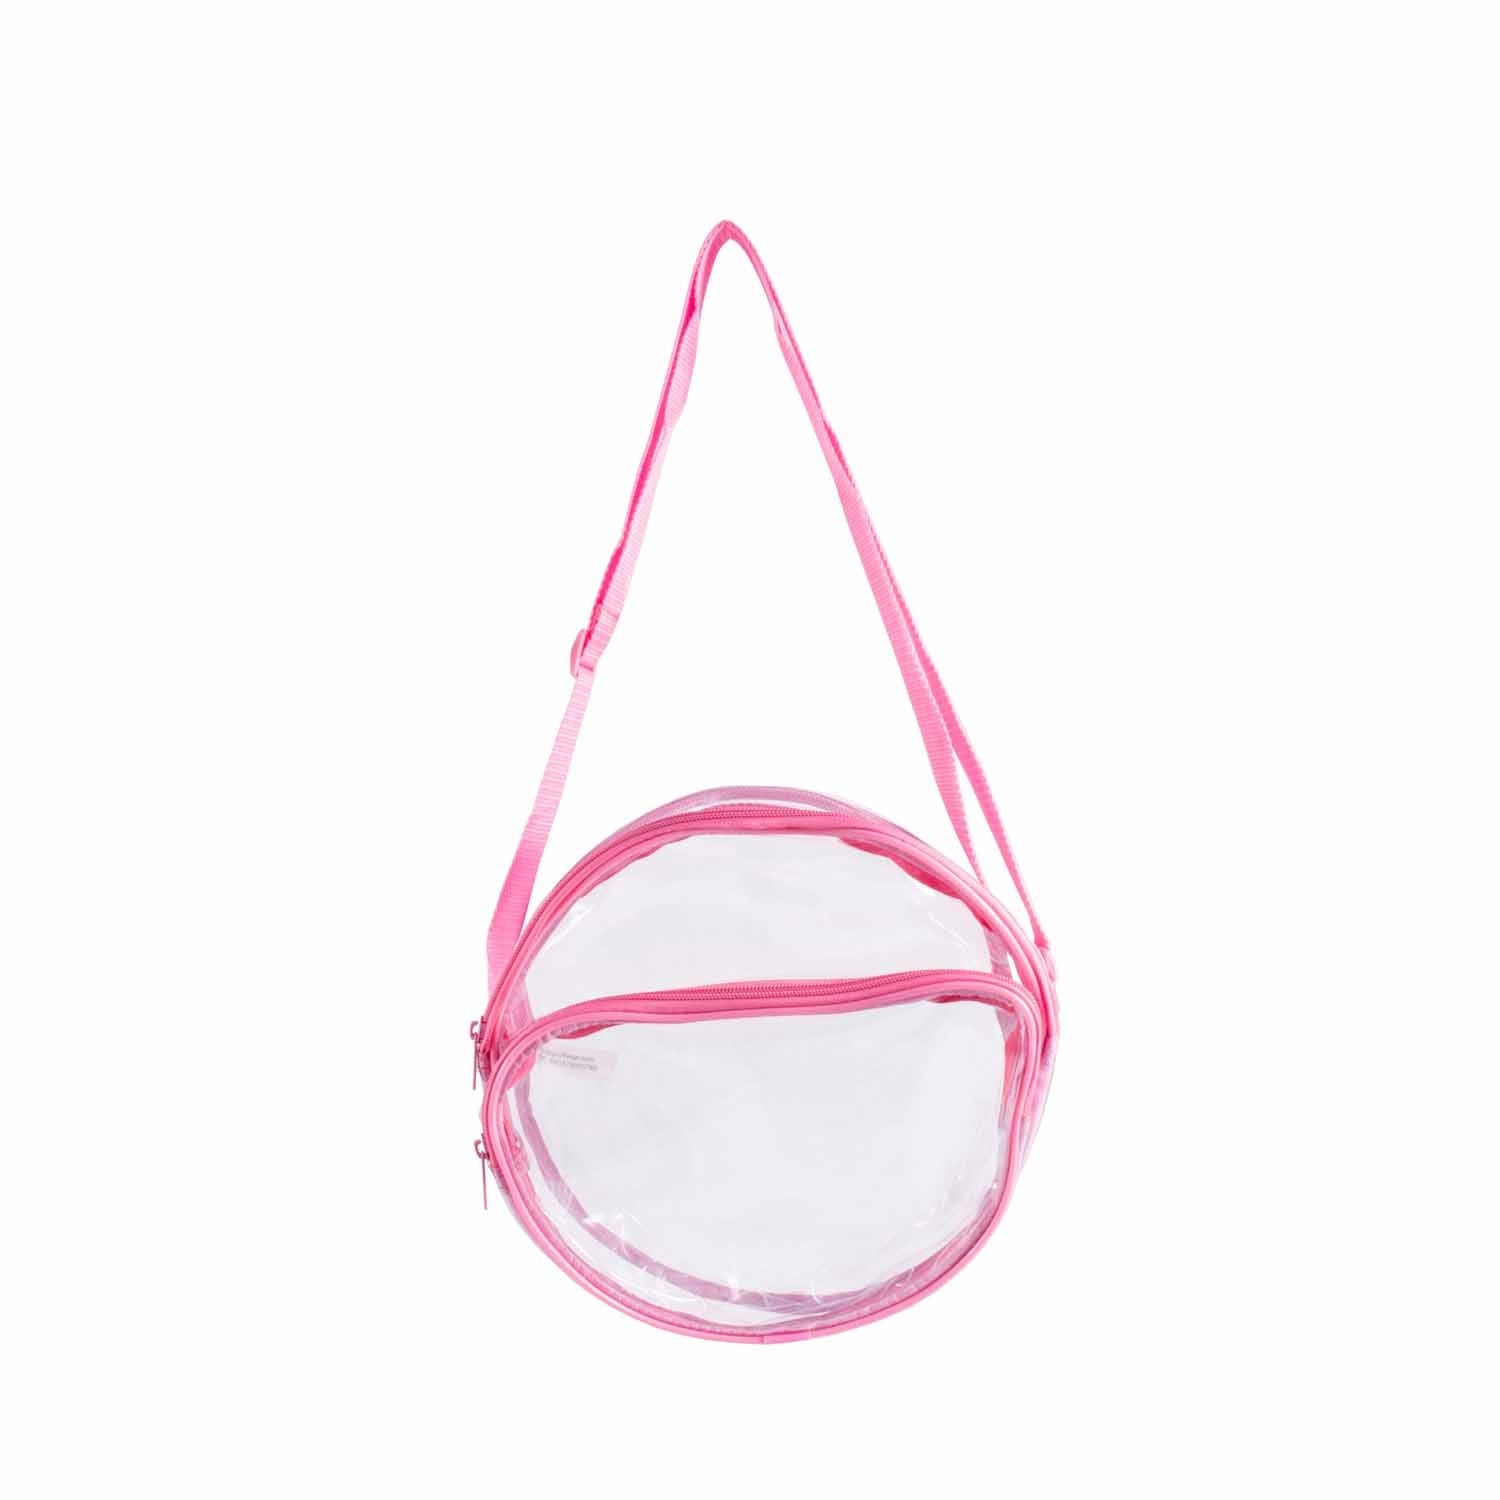 CLEARANCE WHOLESALE 10" CLEAR ROUND CROSSBODY (CASE OF 24 - $2.50 / PIECE) Wholesale Transparent Bag in Assorted Colors SKU: 10-ROUND-24